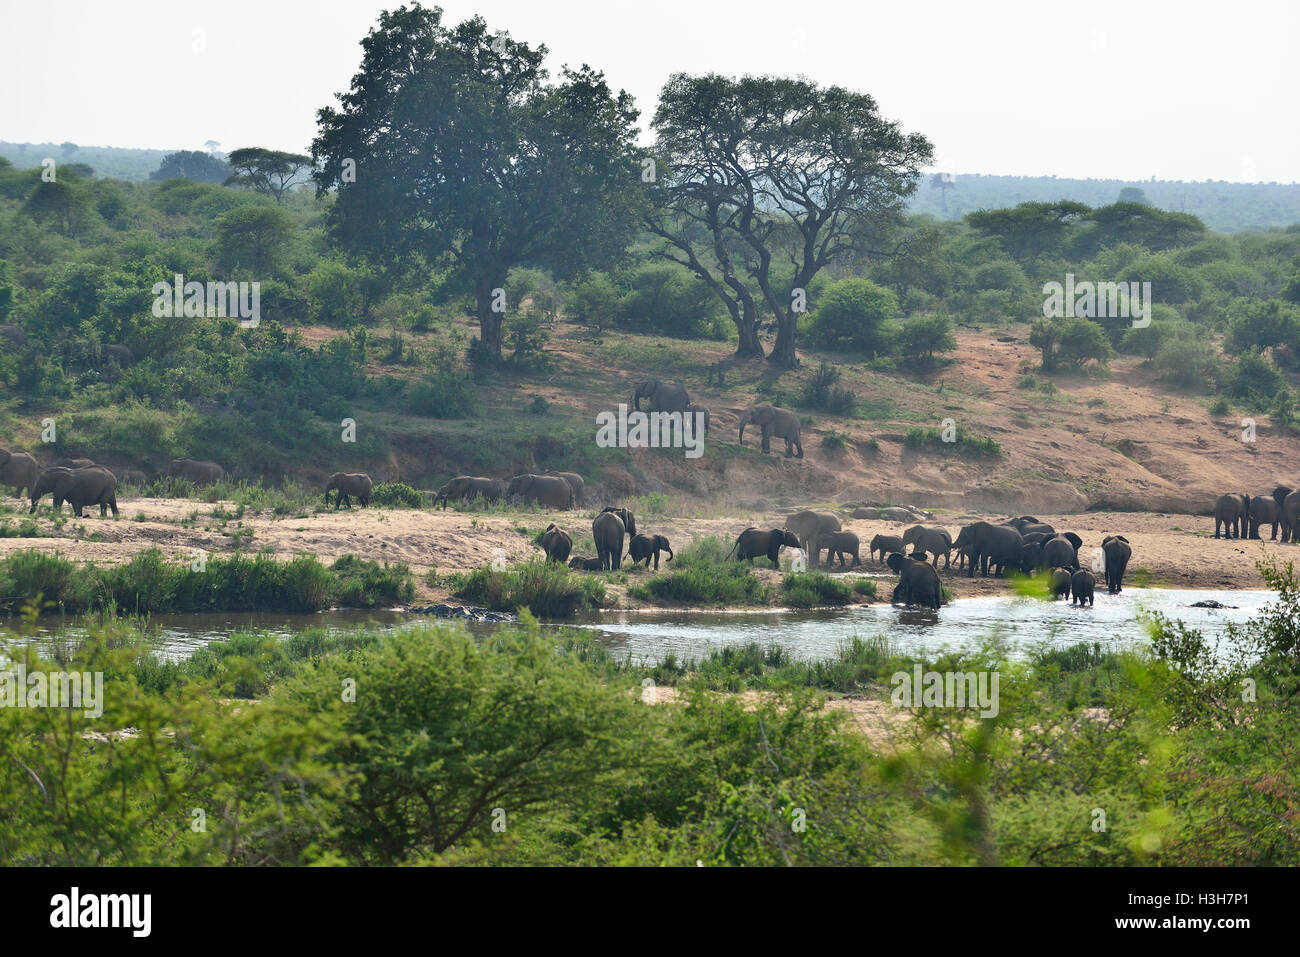 Herd of elephants (as many as 52 counted ) crossing a low water crossing on the Sabie River, Kruger National Park, South Africa Stock Photo